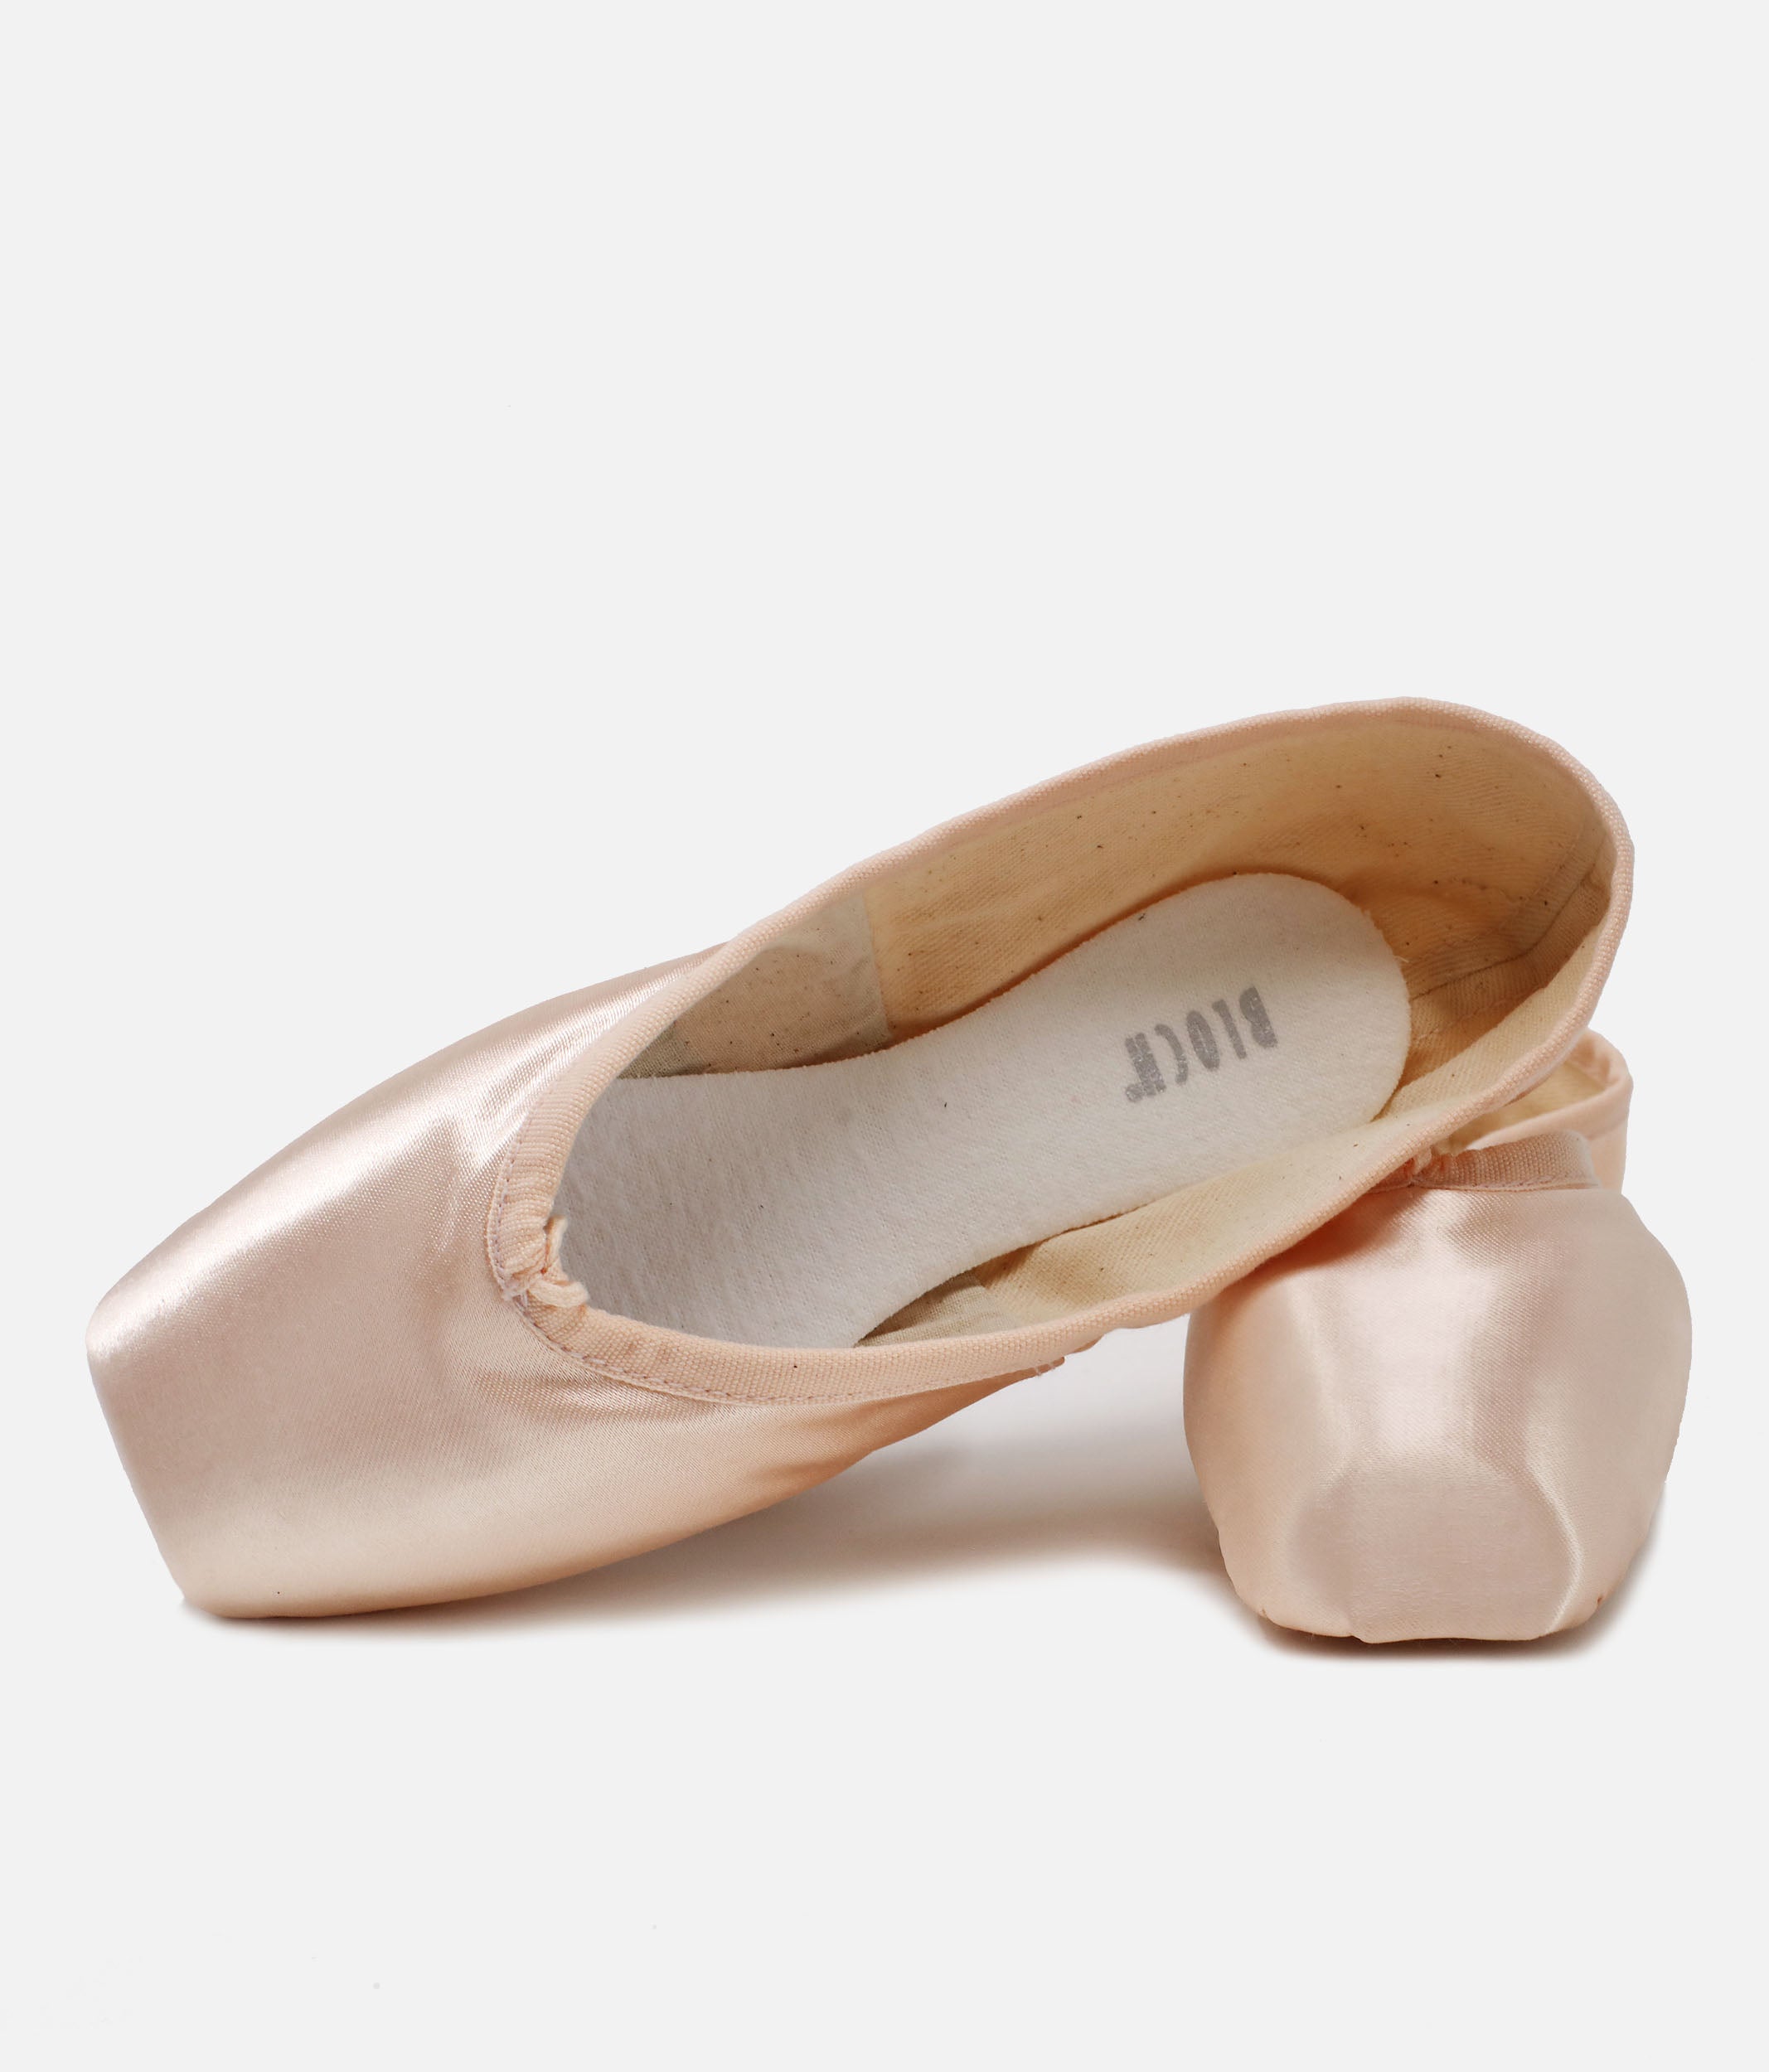 Chaussures demi-pointes - S0 135